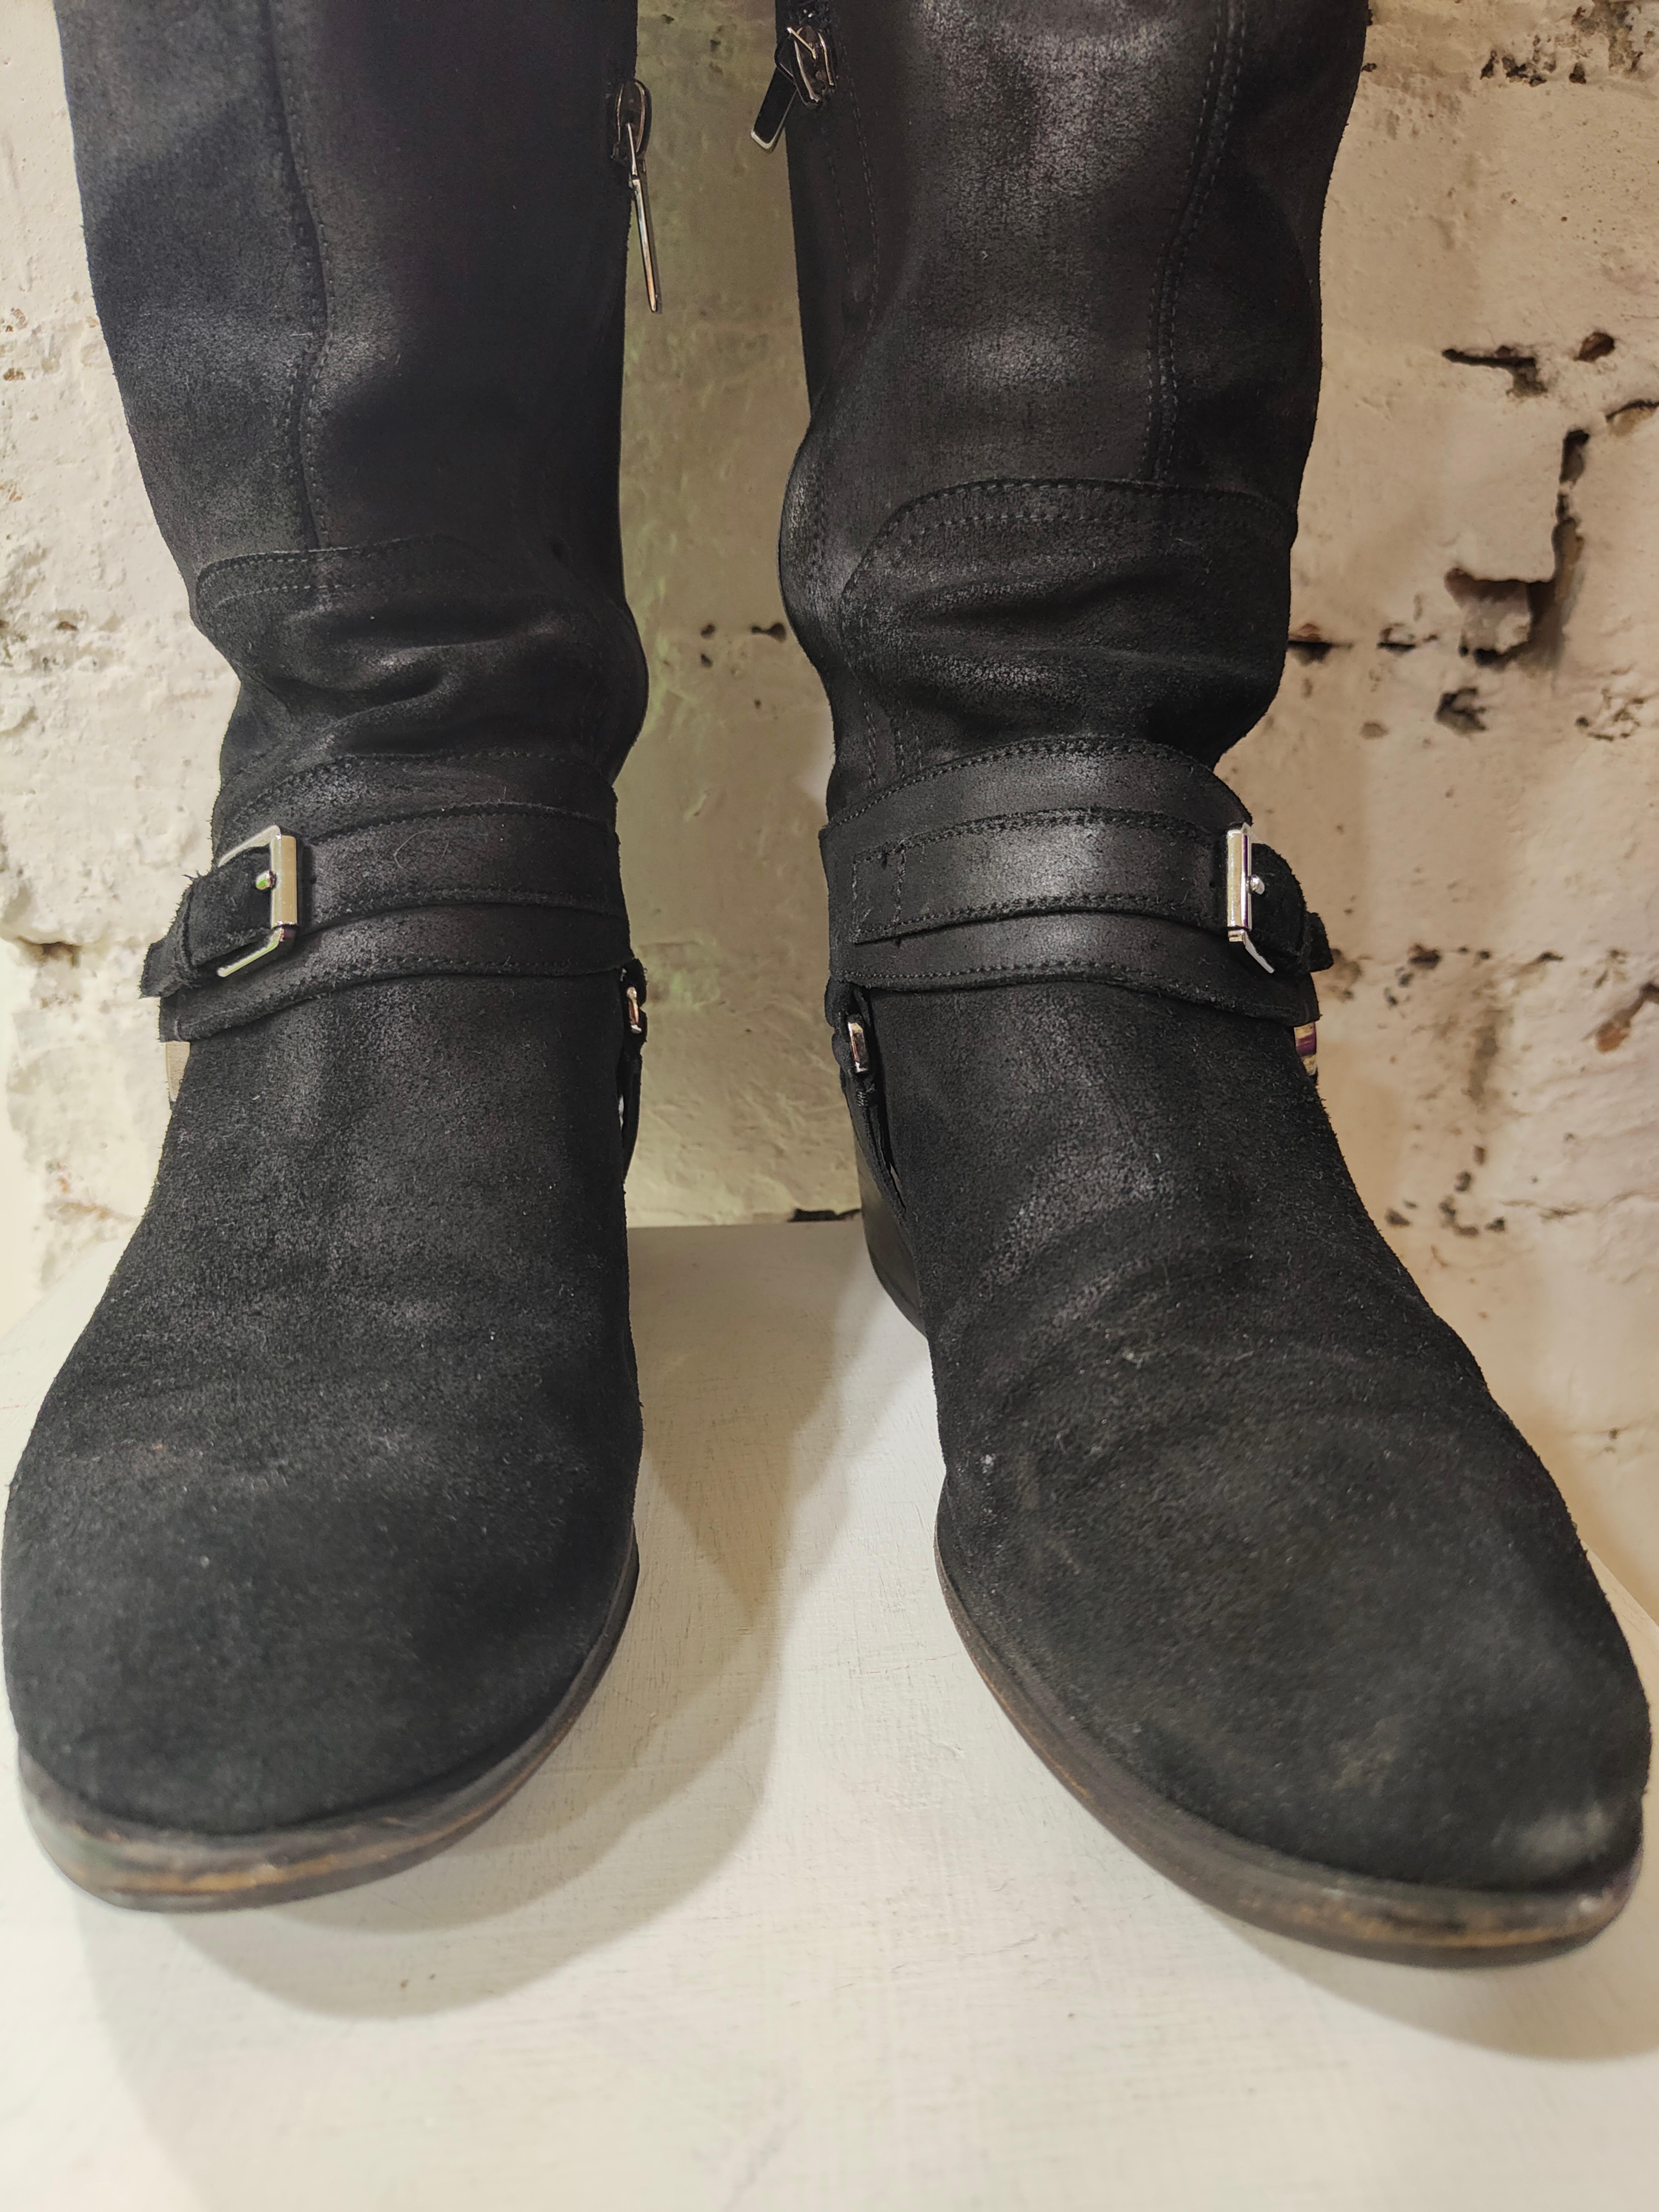 Christian Dior black suede boots In Excellent Condition For Sale In Capri, IT